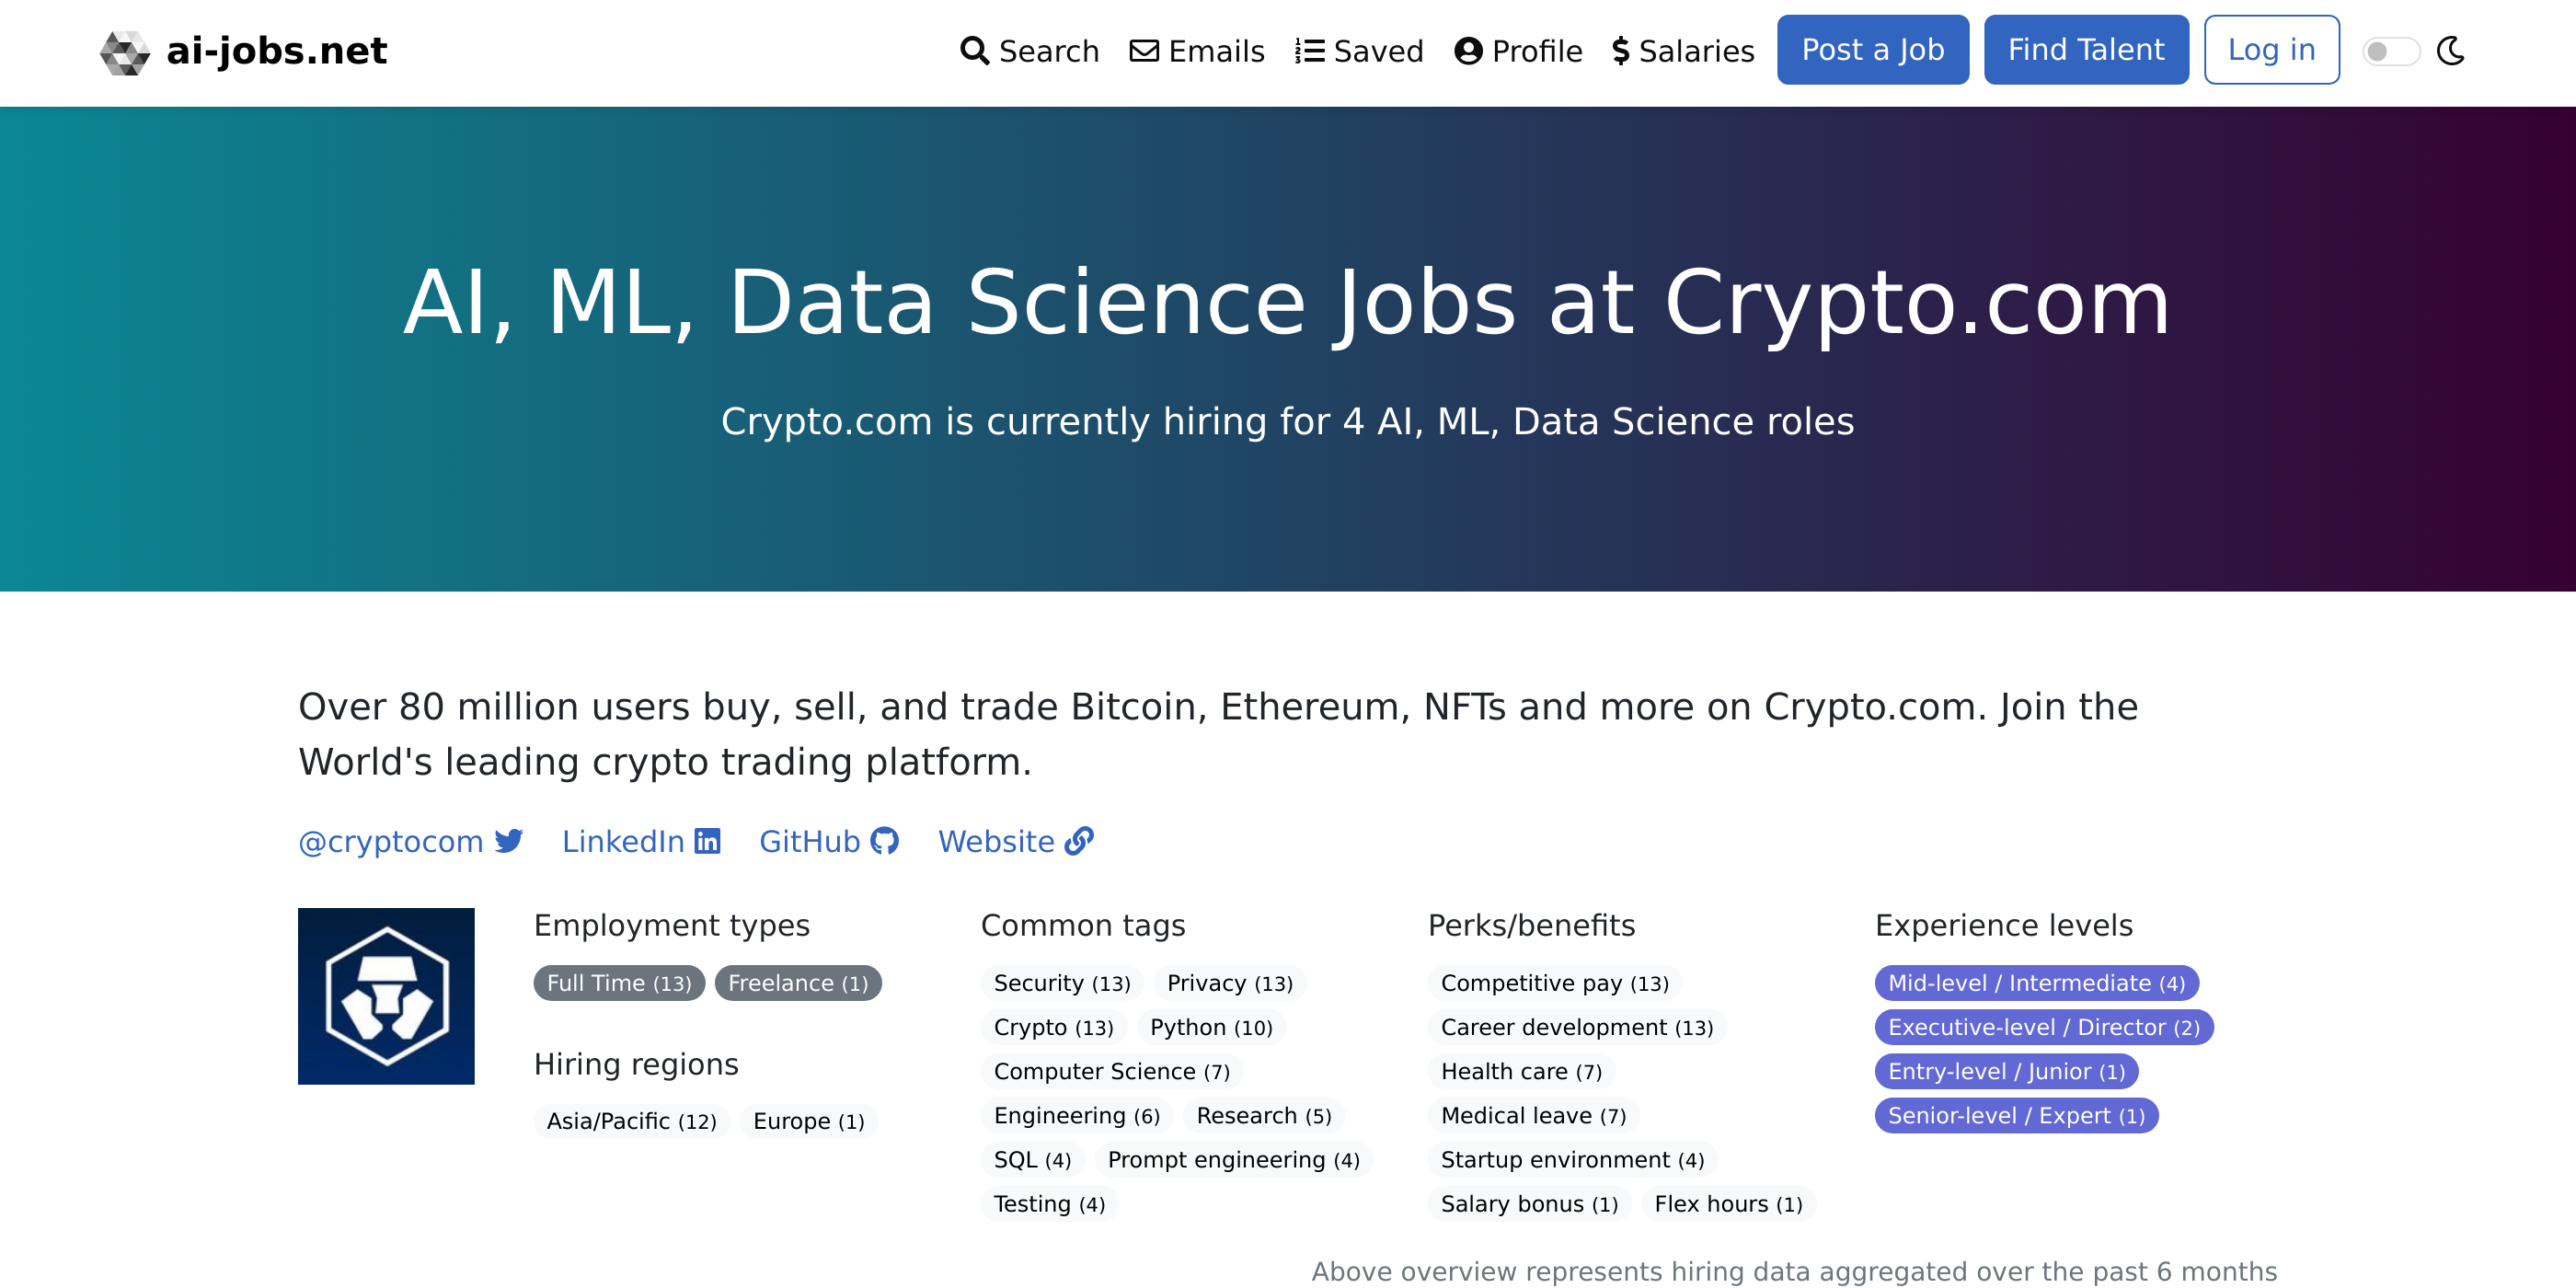 Data Science jobs in the crypto space - Crypto Valley Jobs